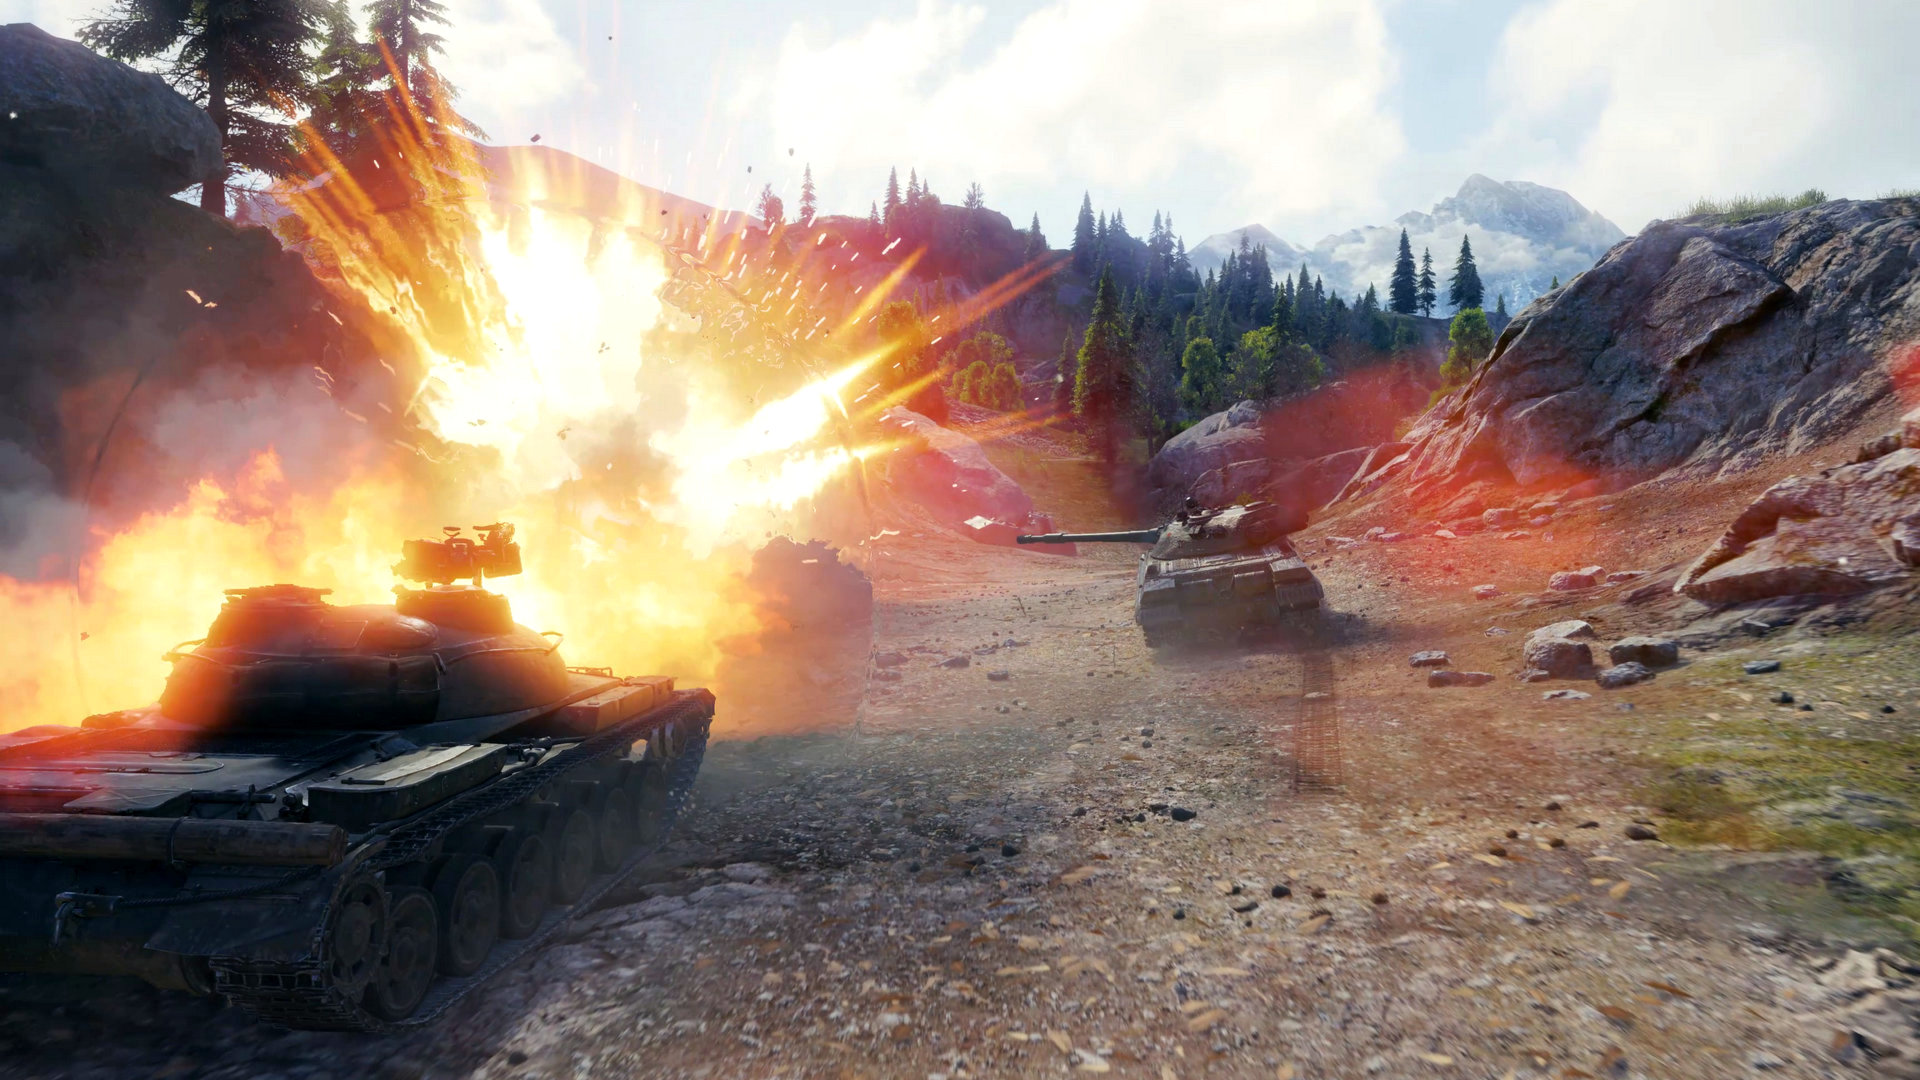 World of Tanks is giving seven days’ free premium access to new players this month